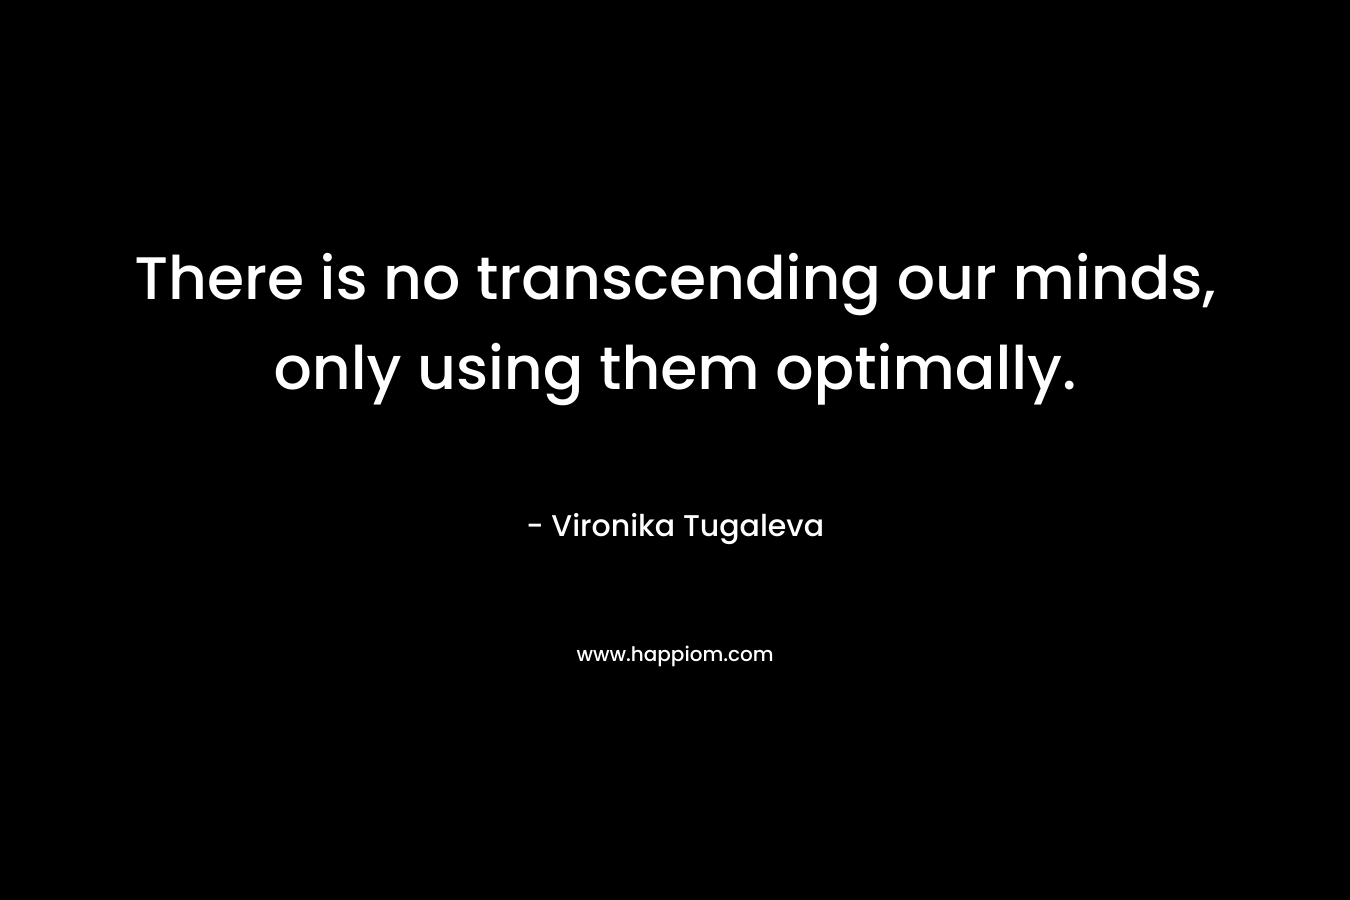 There is no transcending our minds, only using them optimally. – Vironika Tugaleva